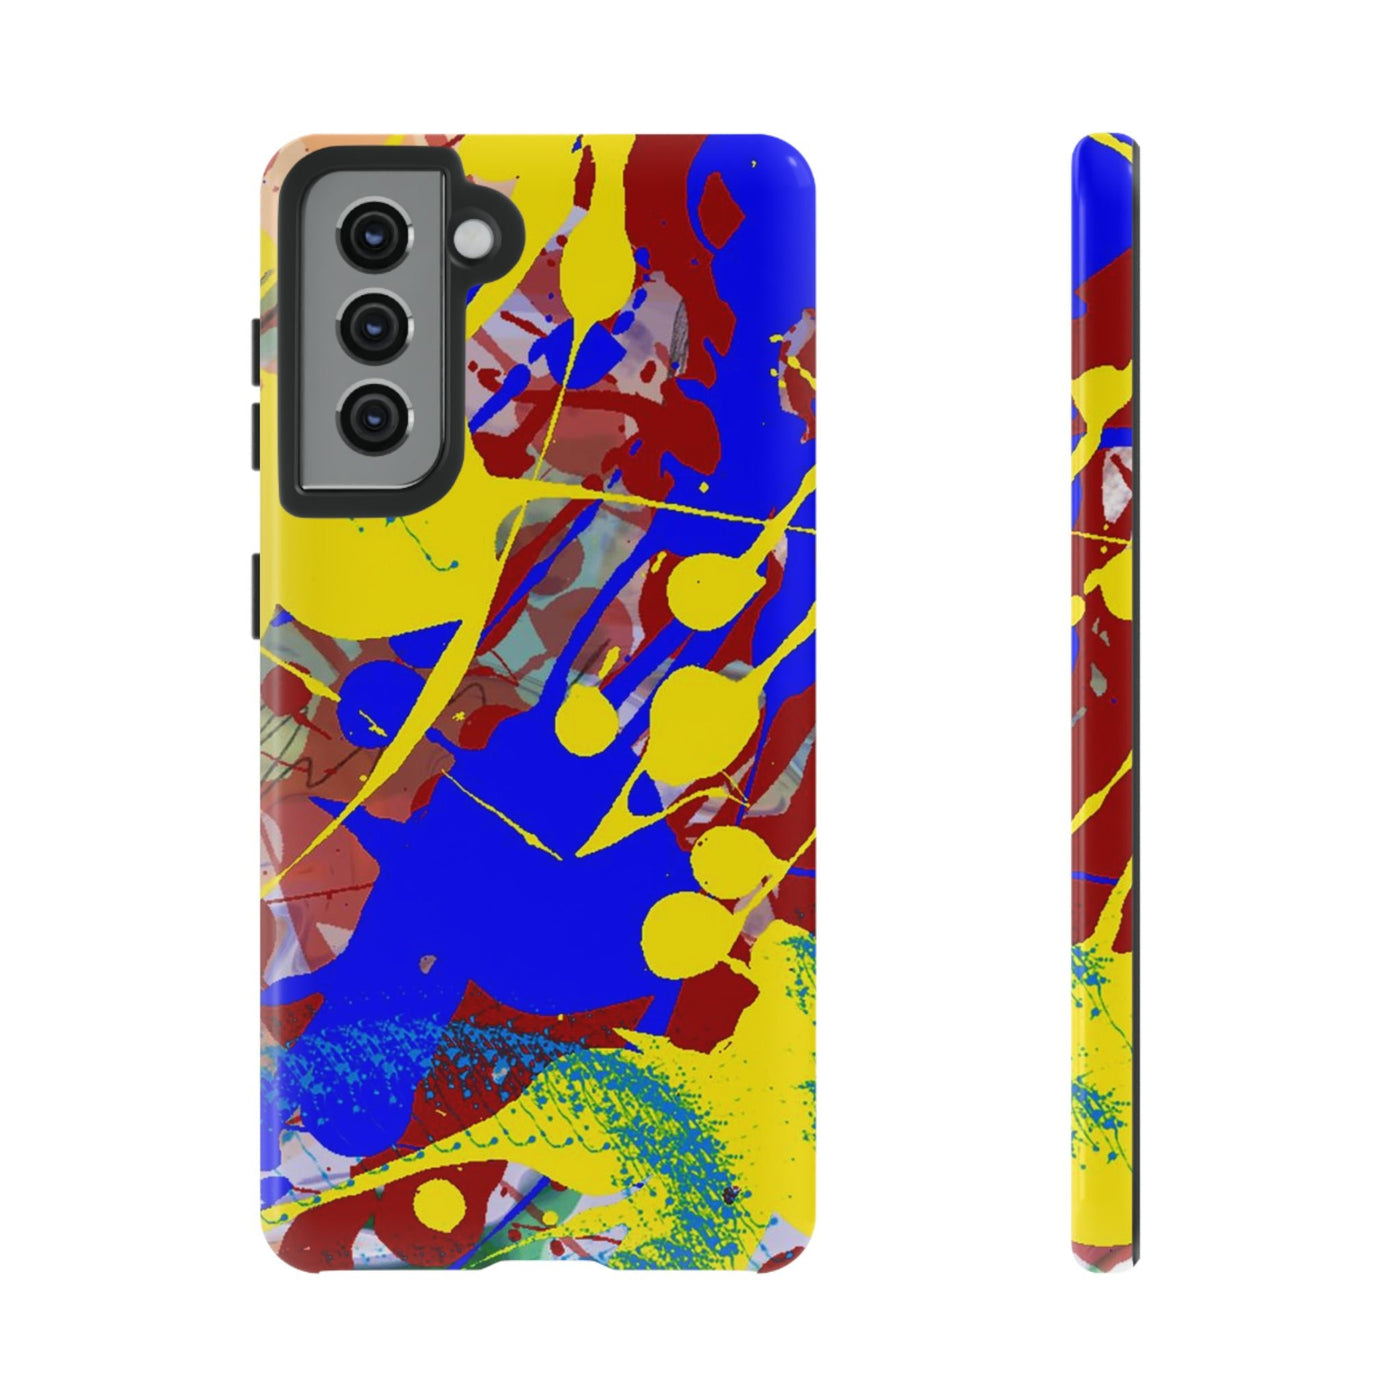 Samsung Galaxy Phone Case | Galaxy S23, S22, S21, S20 | Luxury Case Double Layered | Impact Resistant | Fashionable - Paint Spill 2 - Studio40ParkLane